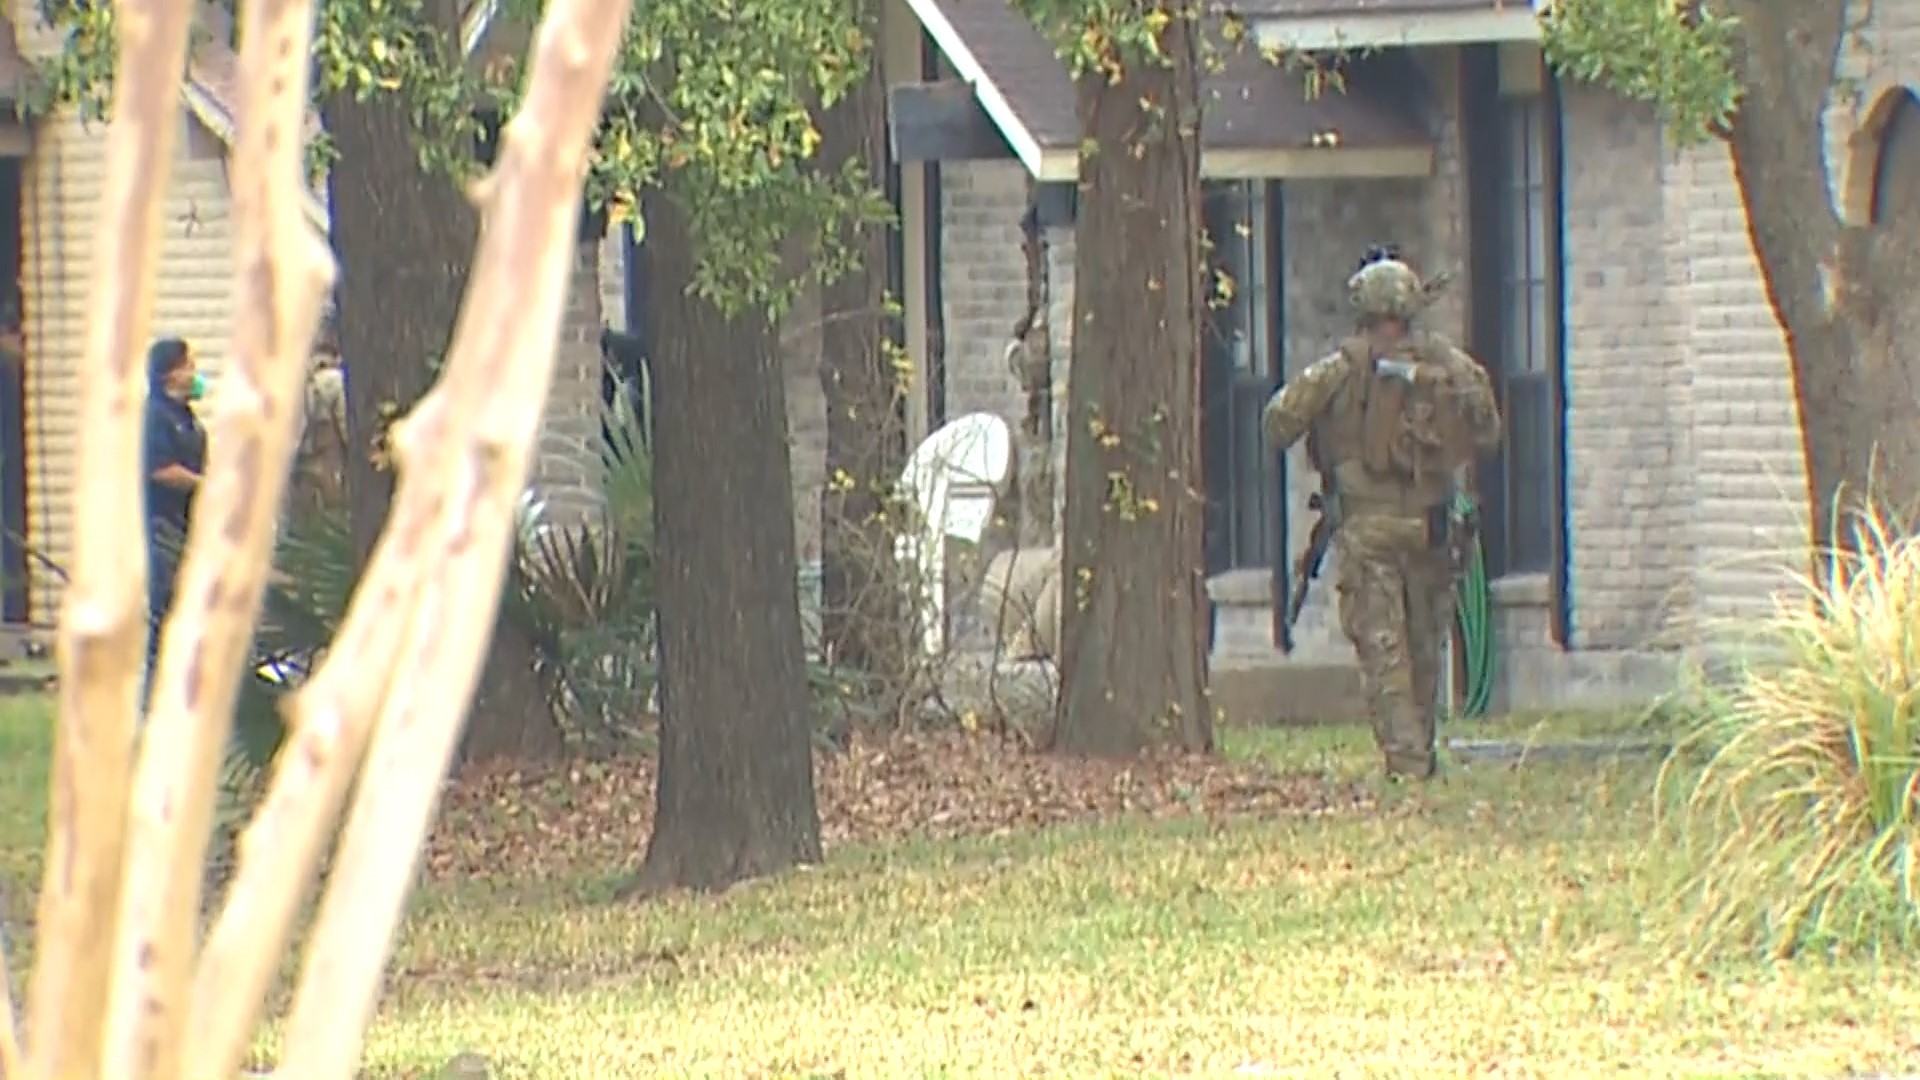 Harris County deputies surrounded the home early Wednesday morning before they also were shot at. They later found 4 dead in the home, including the suspect.